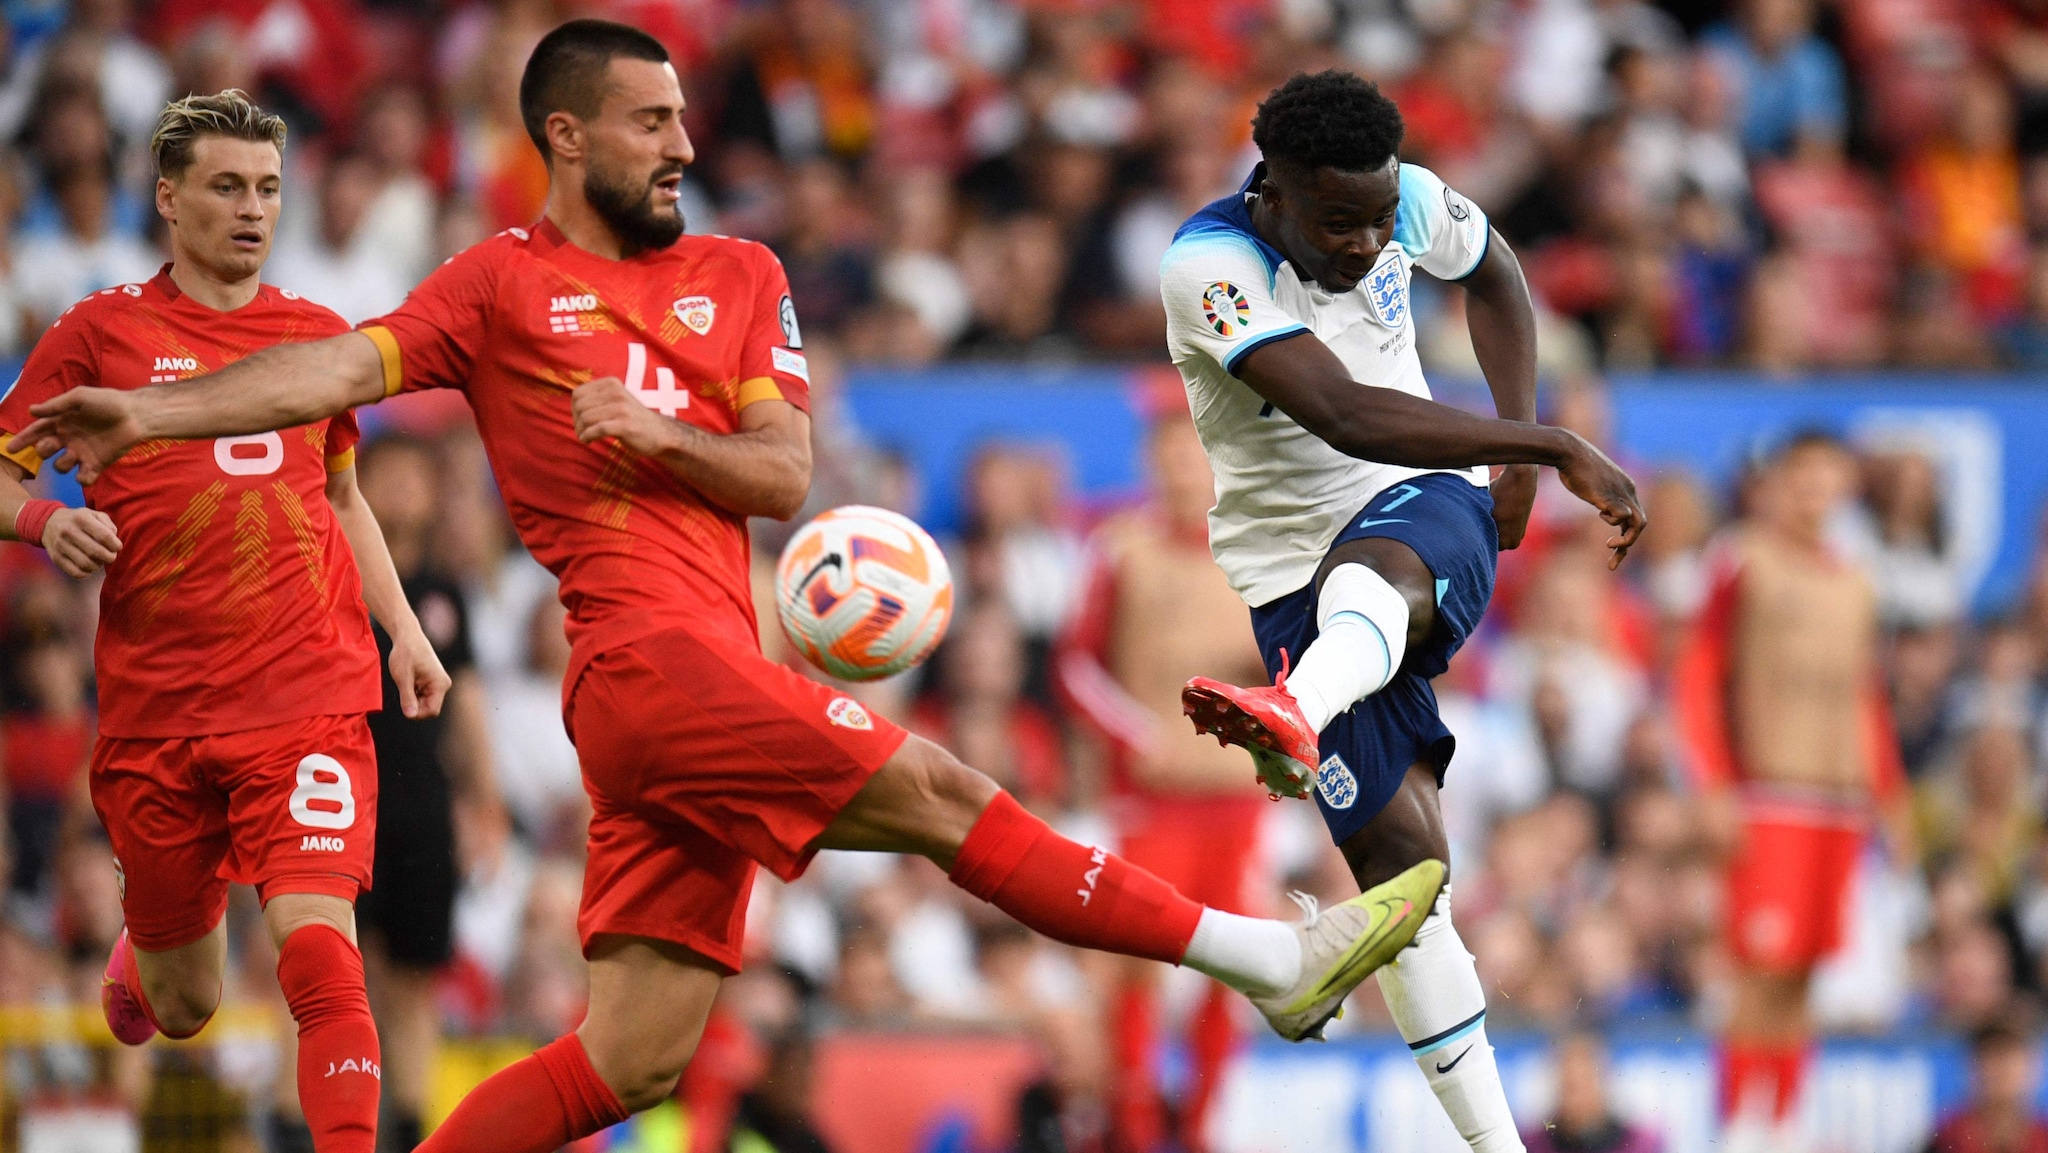 EC football qualifiers: A hat trick case as England humiliated North Macedonia